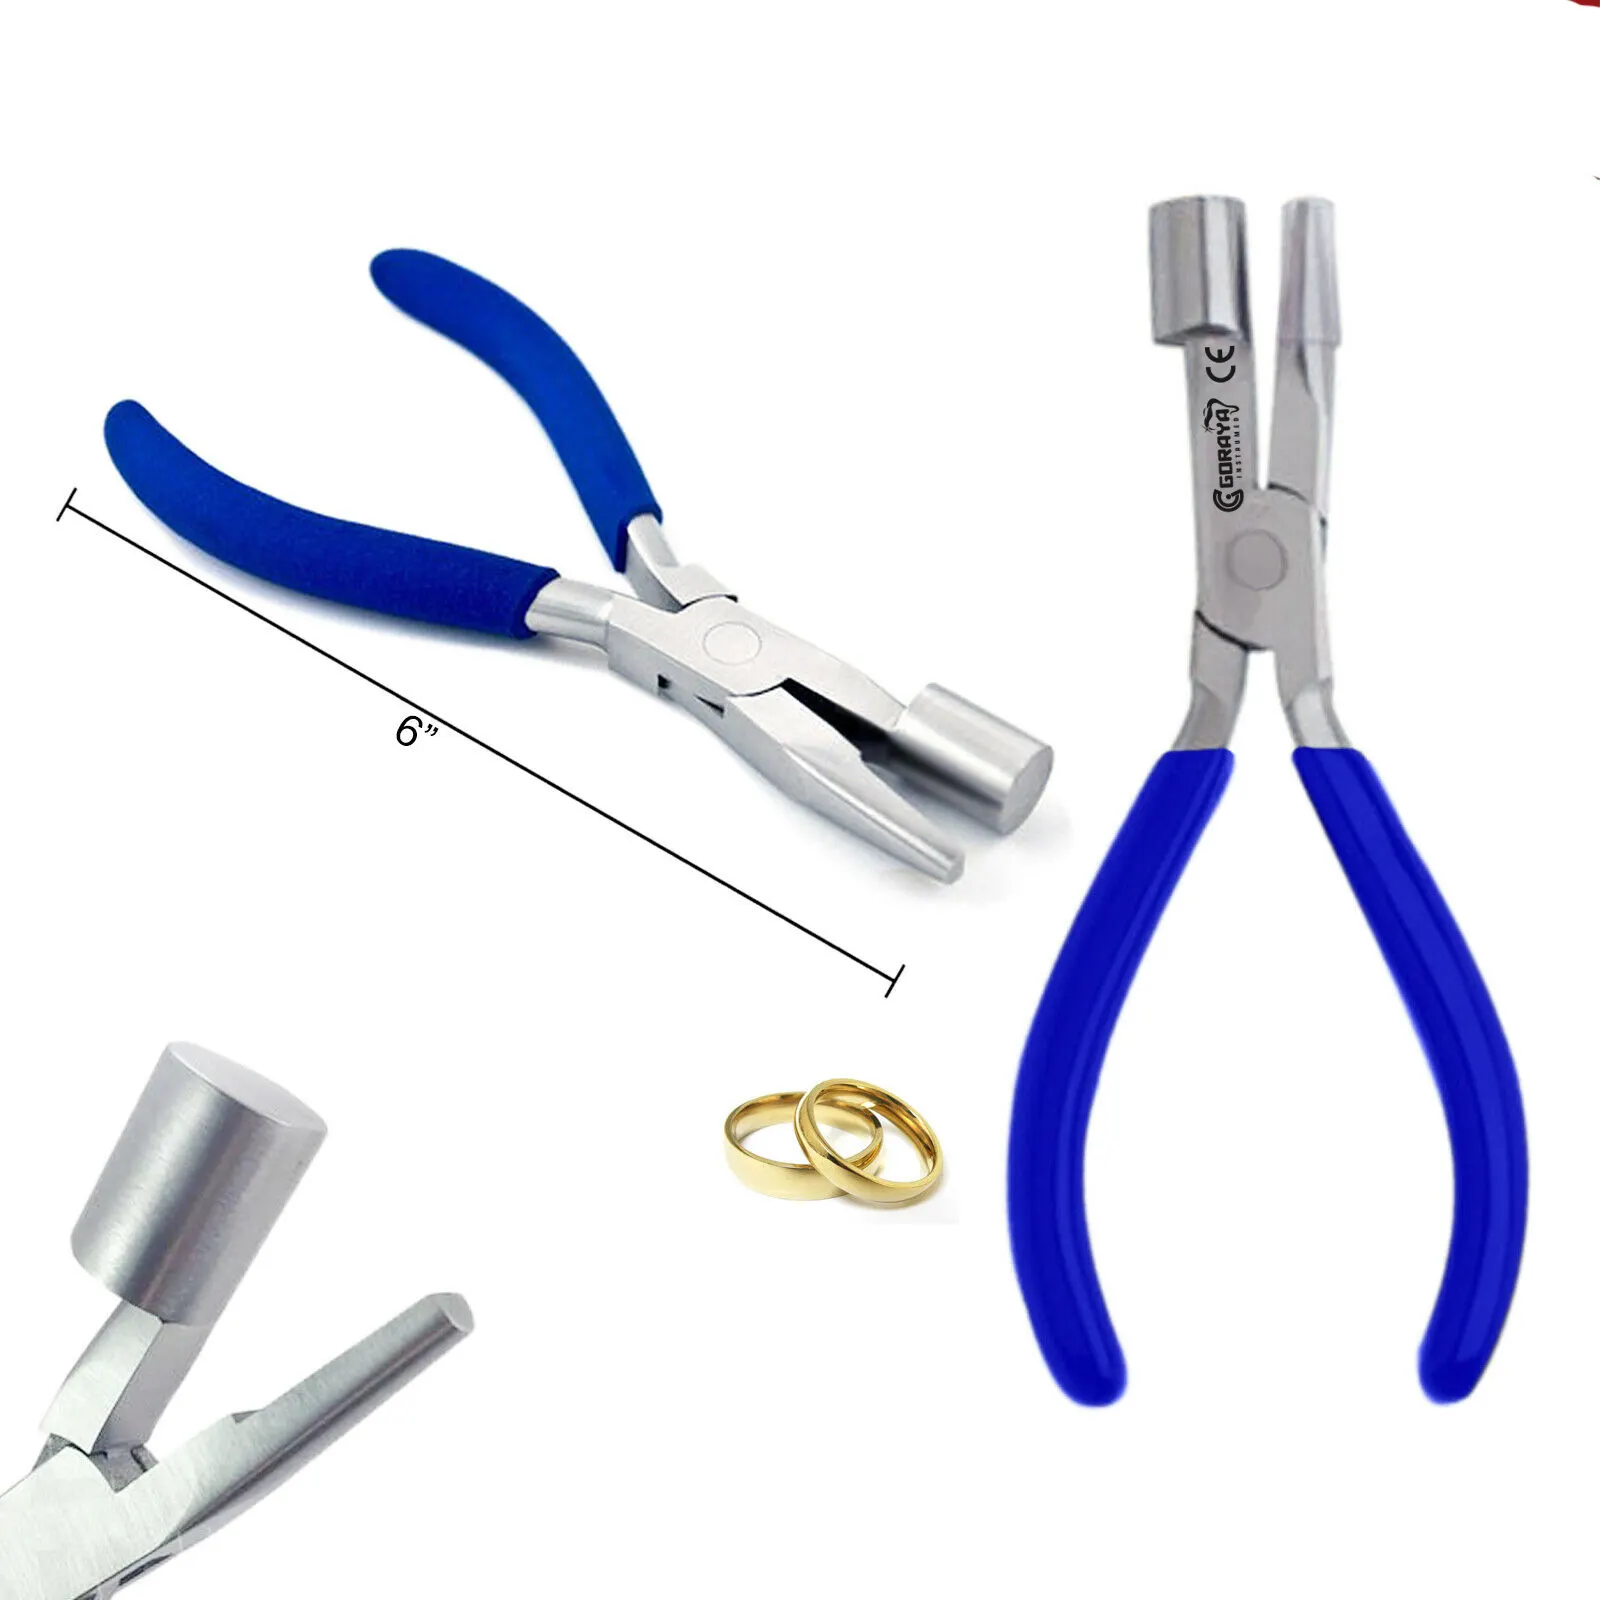 HOT SALE GORAYA GERMAN JEWELRY WRAP & TAP PLIERS RING FORMING BAIL MAKING WIRE LOOPING MEN RING SIZE CE ISO APPROVED